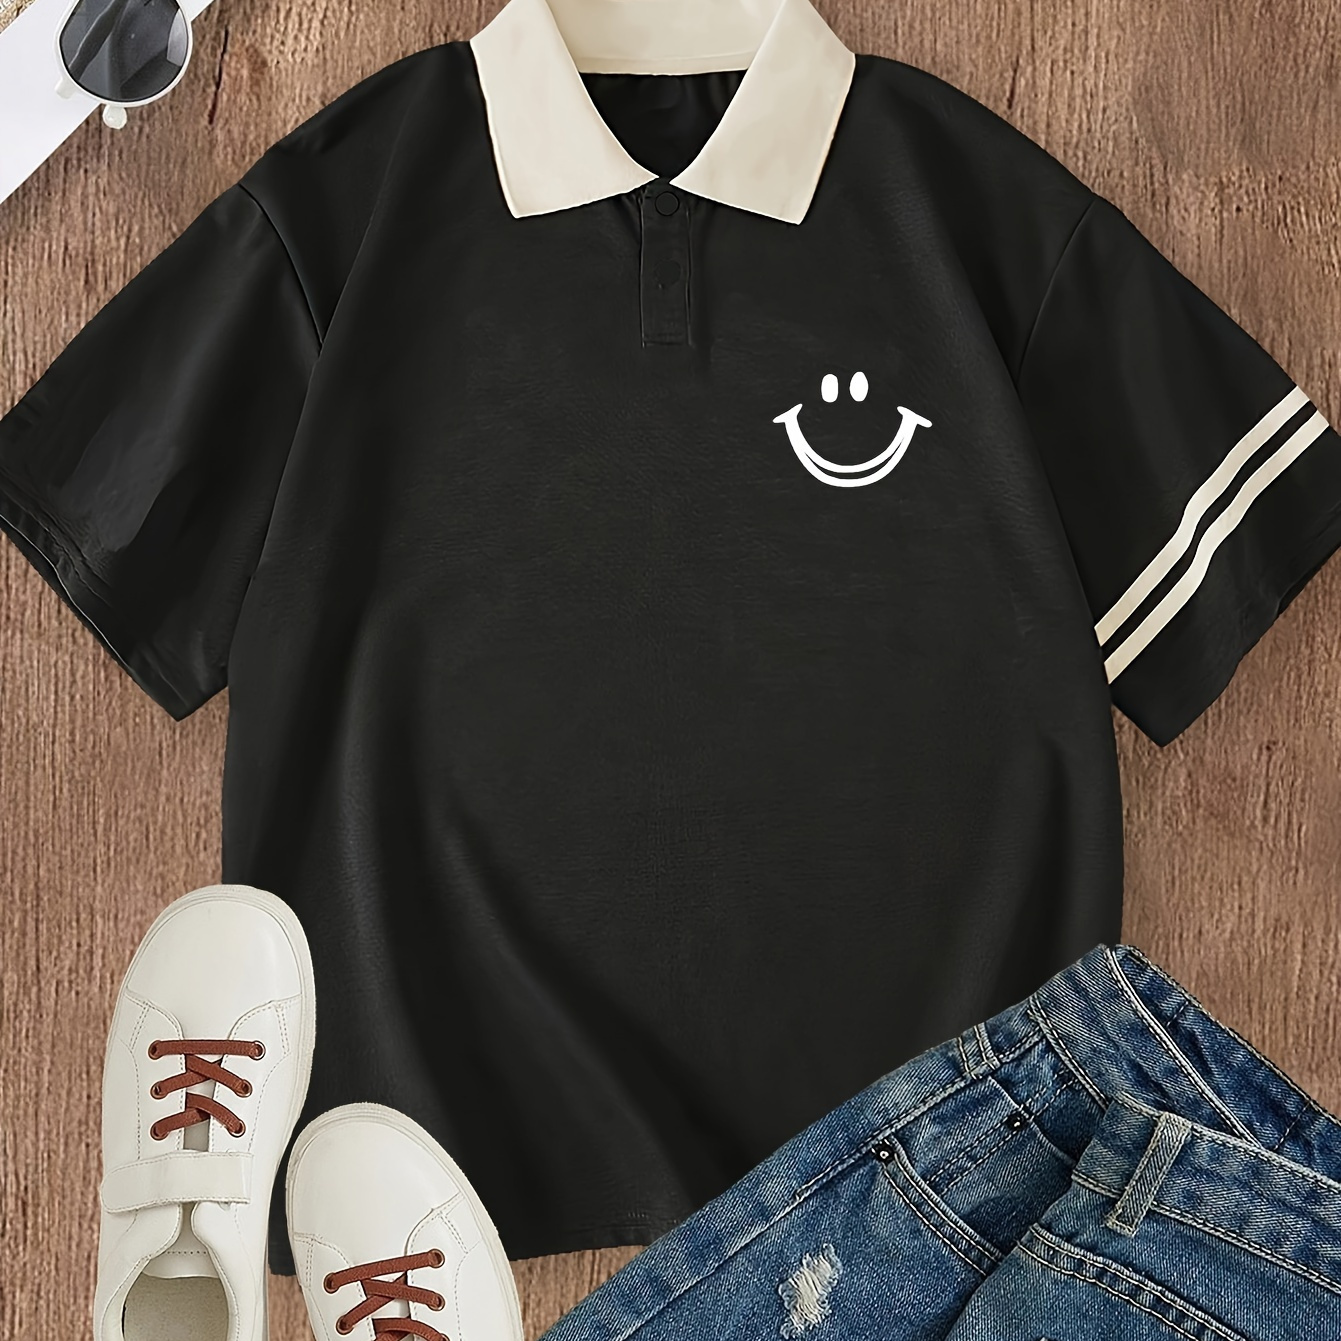 

Smiling Face Print Versatile Polo T-shirt, Short Sleeves Contrast Color Casual Comfy Tee, Women's Sports Tops